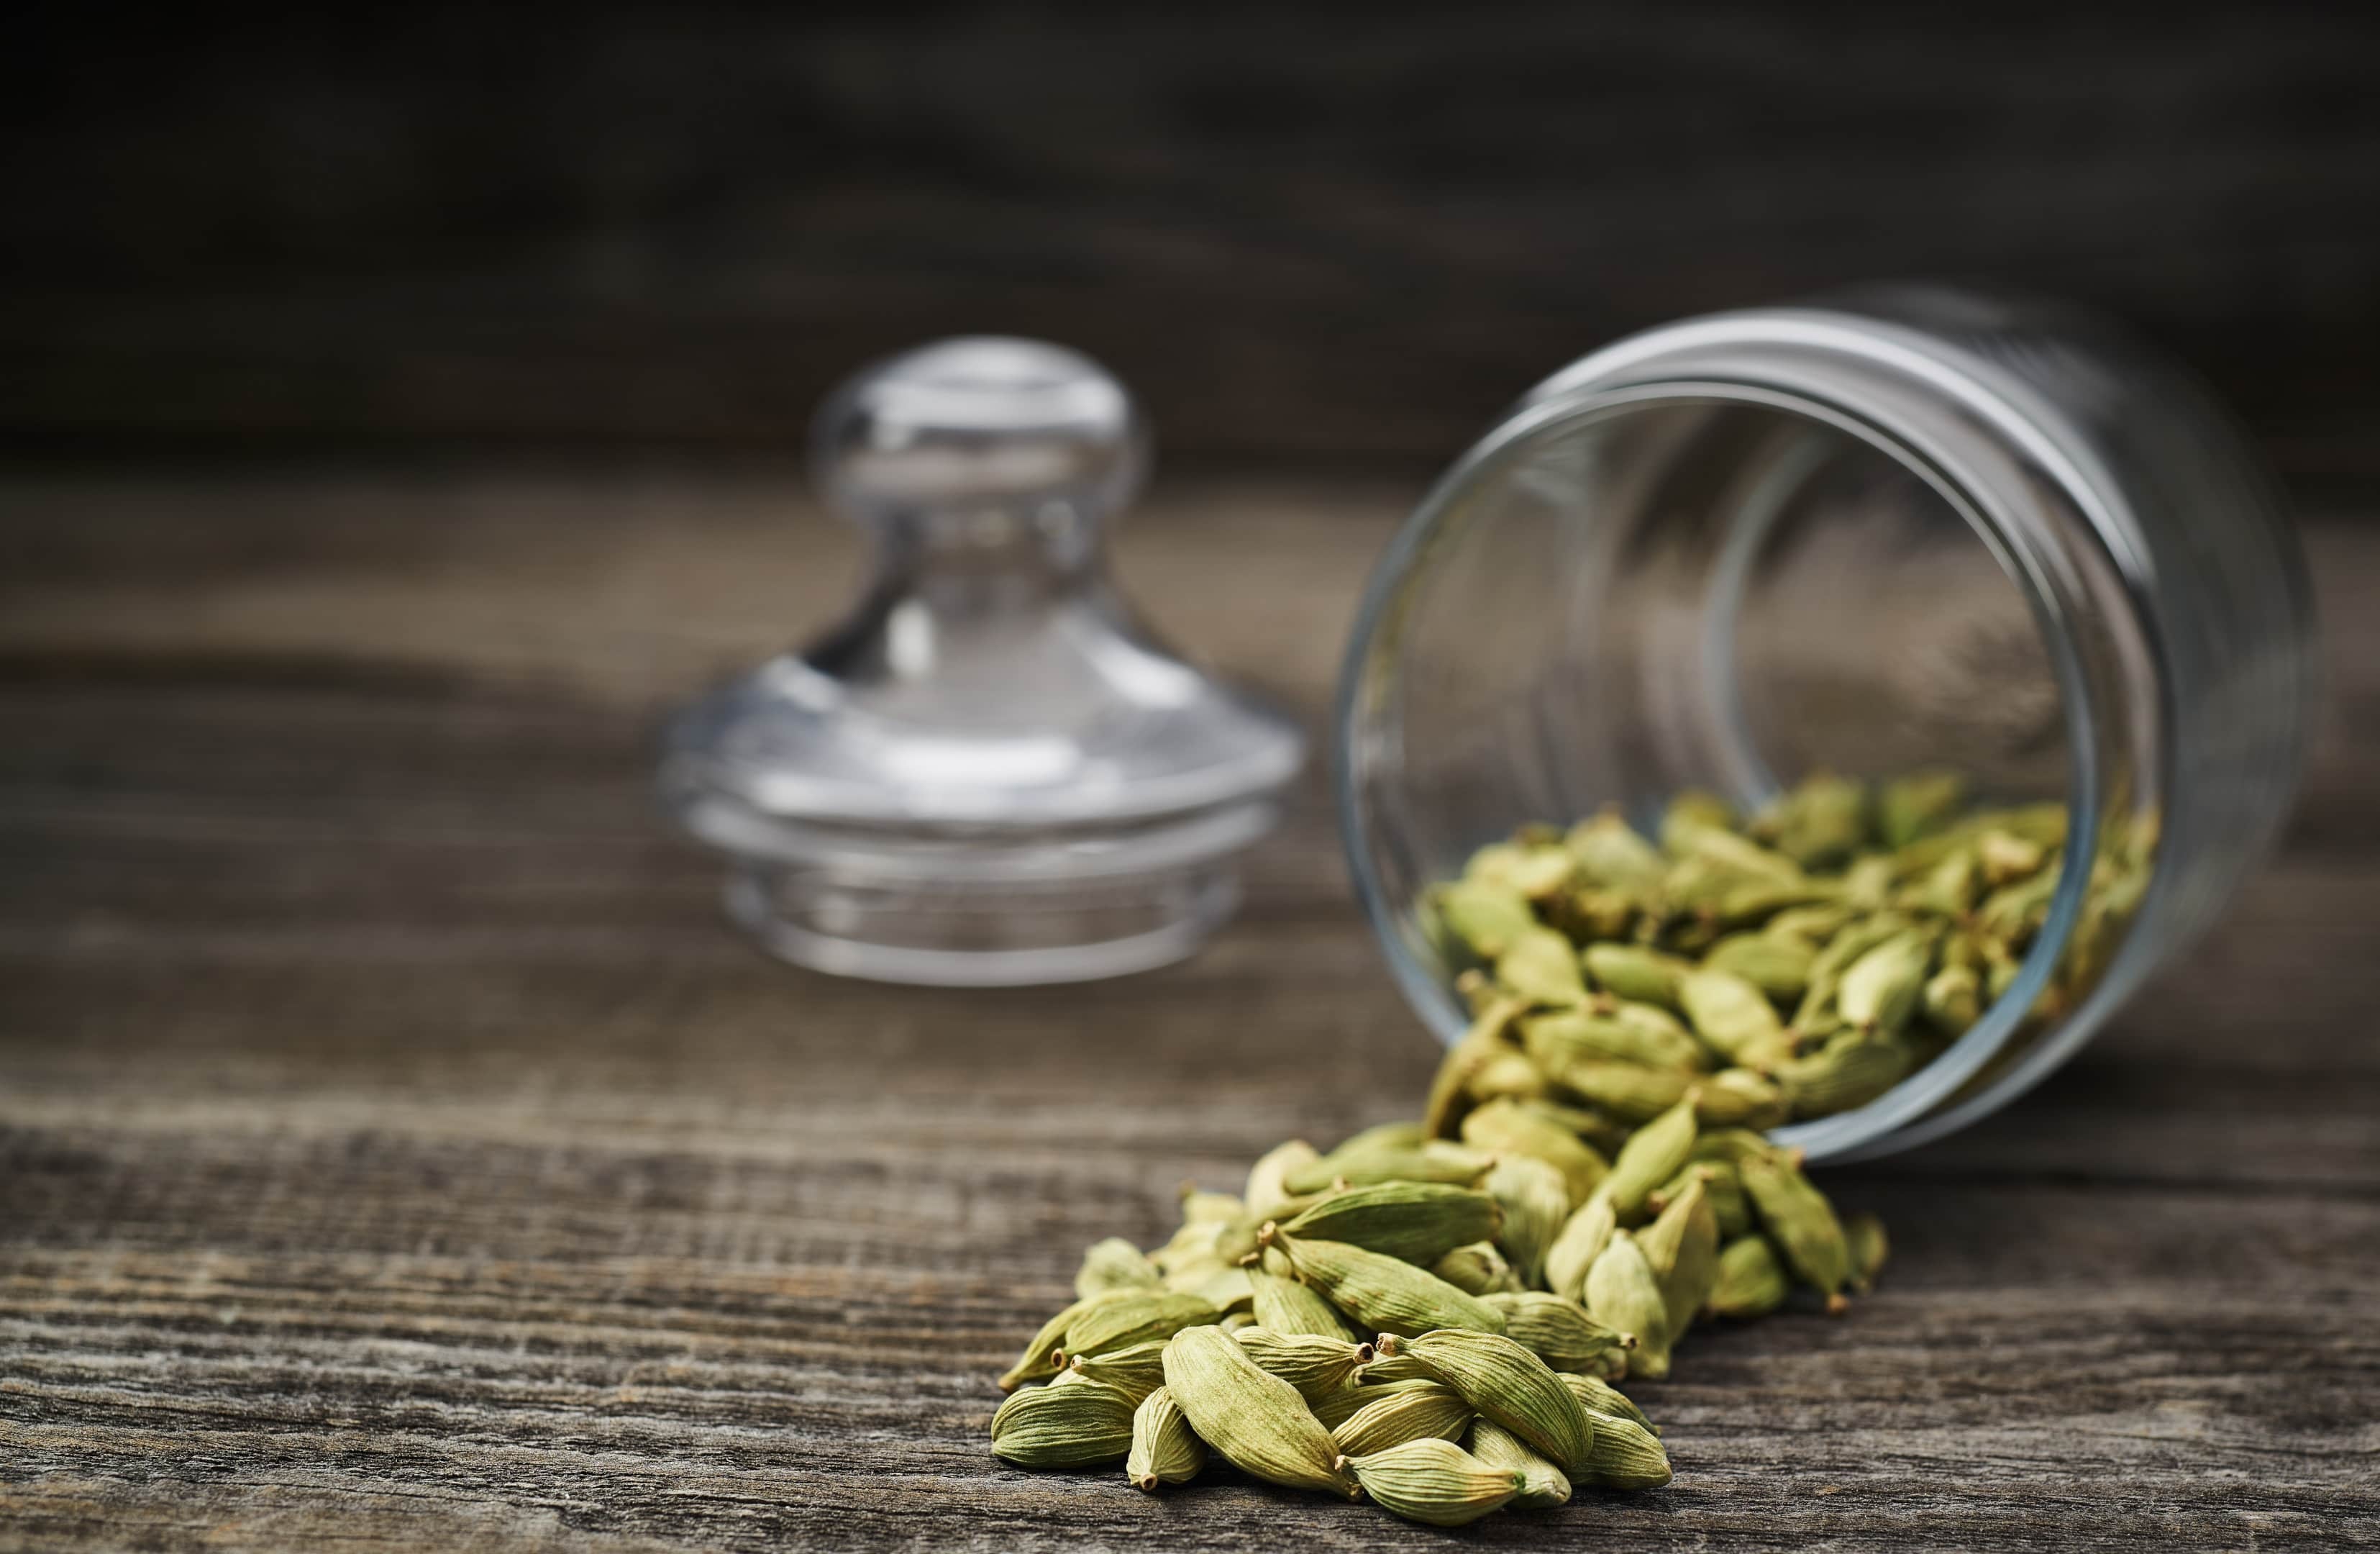 Cardamom substitute, Easily find spices, Flavorful blend, Culinary hack, 3310x2160 HD Desktop